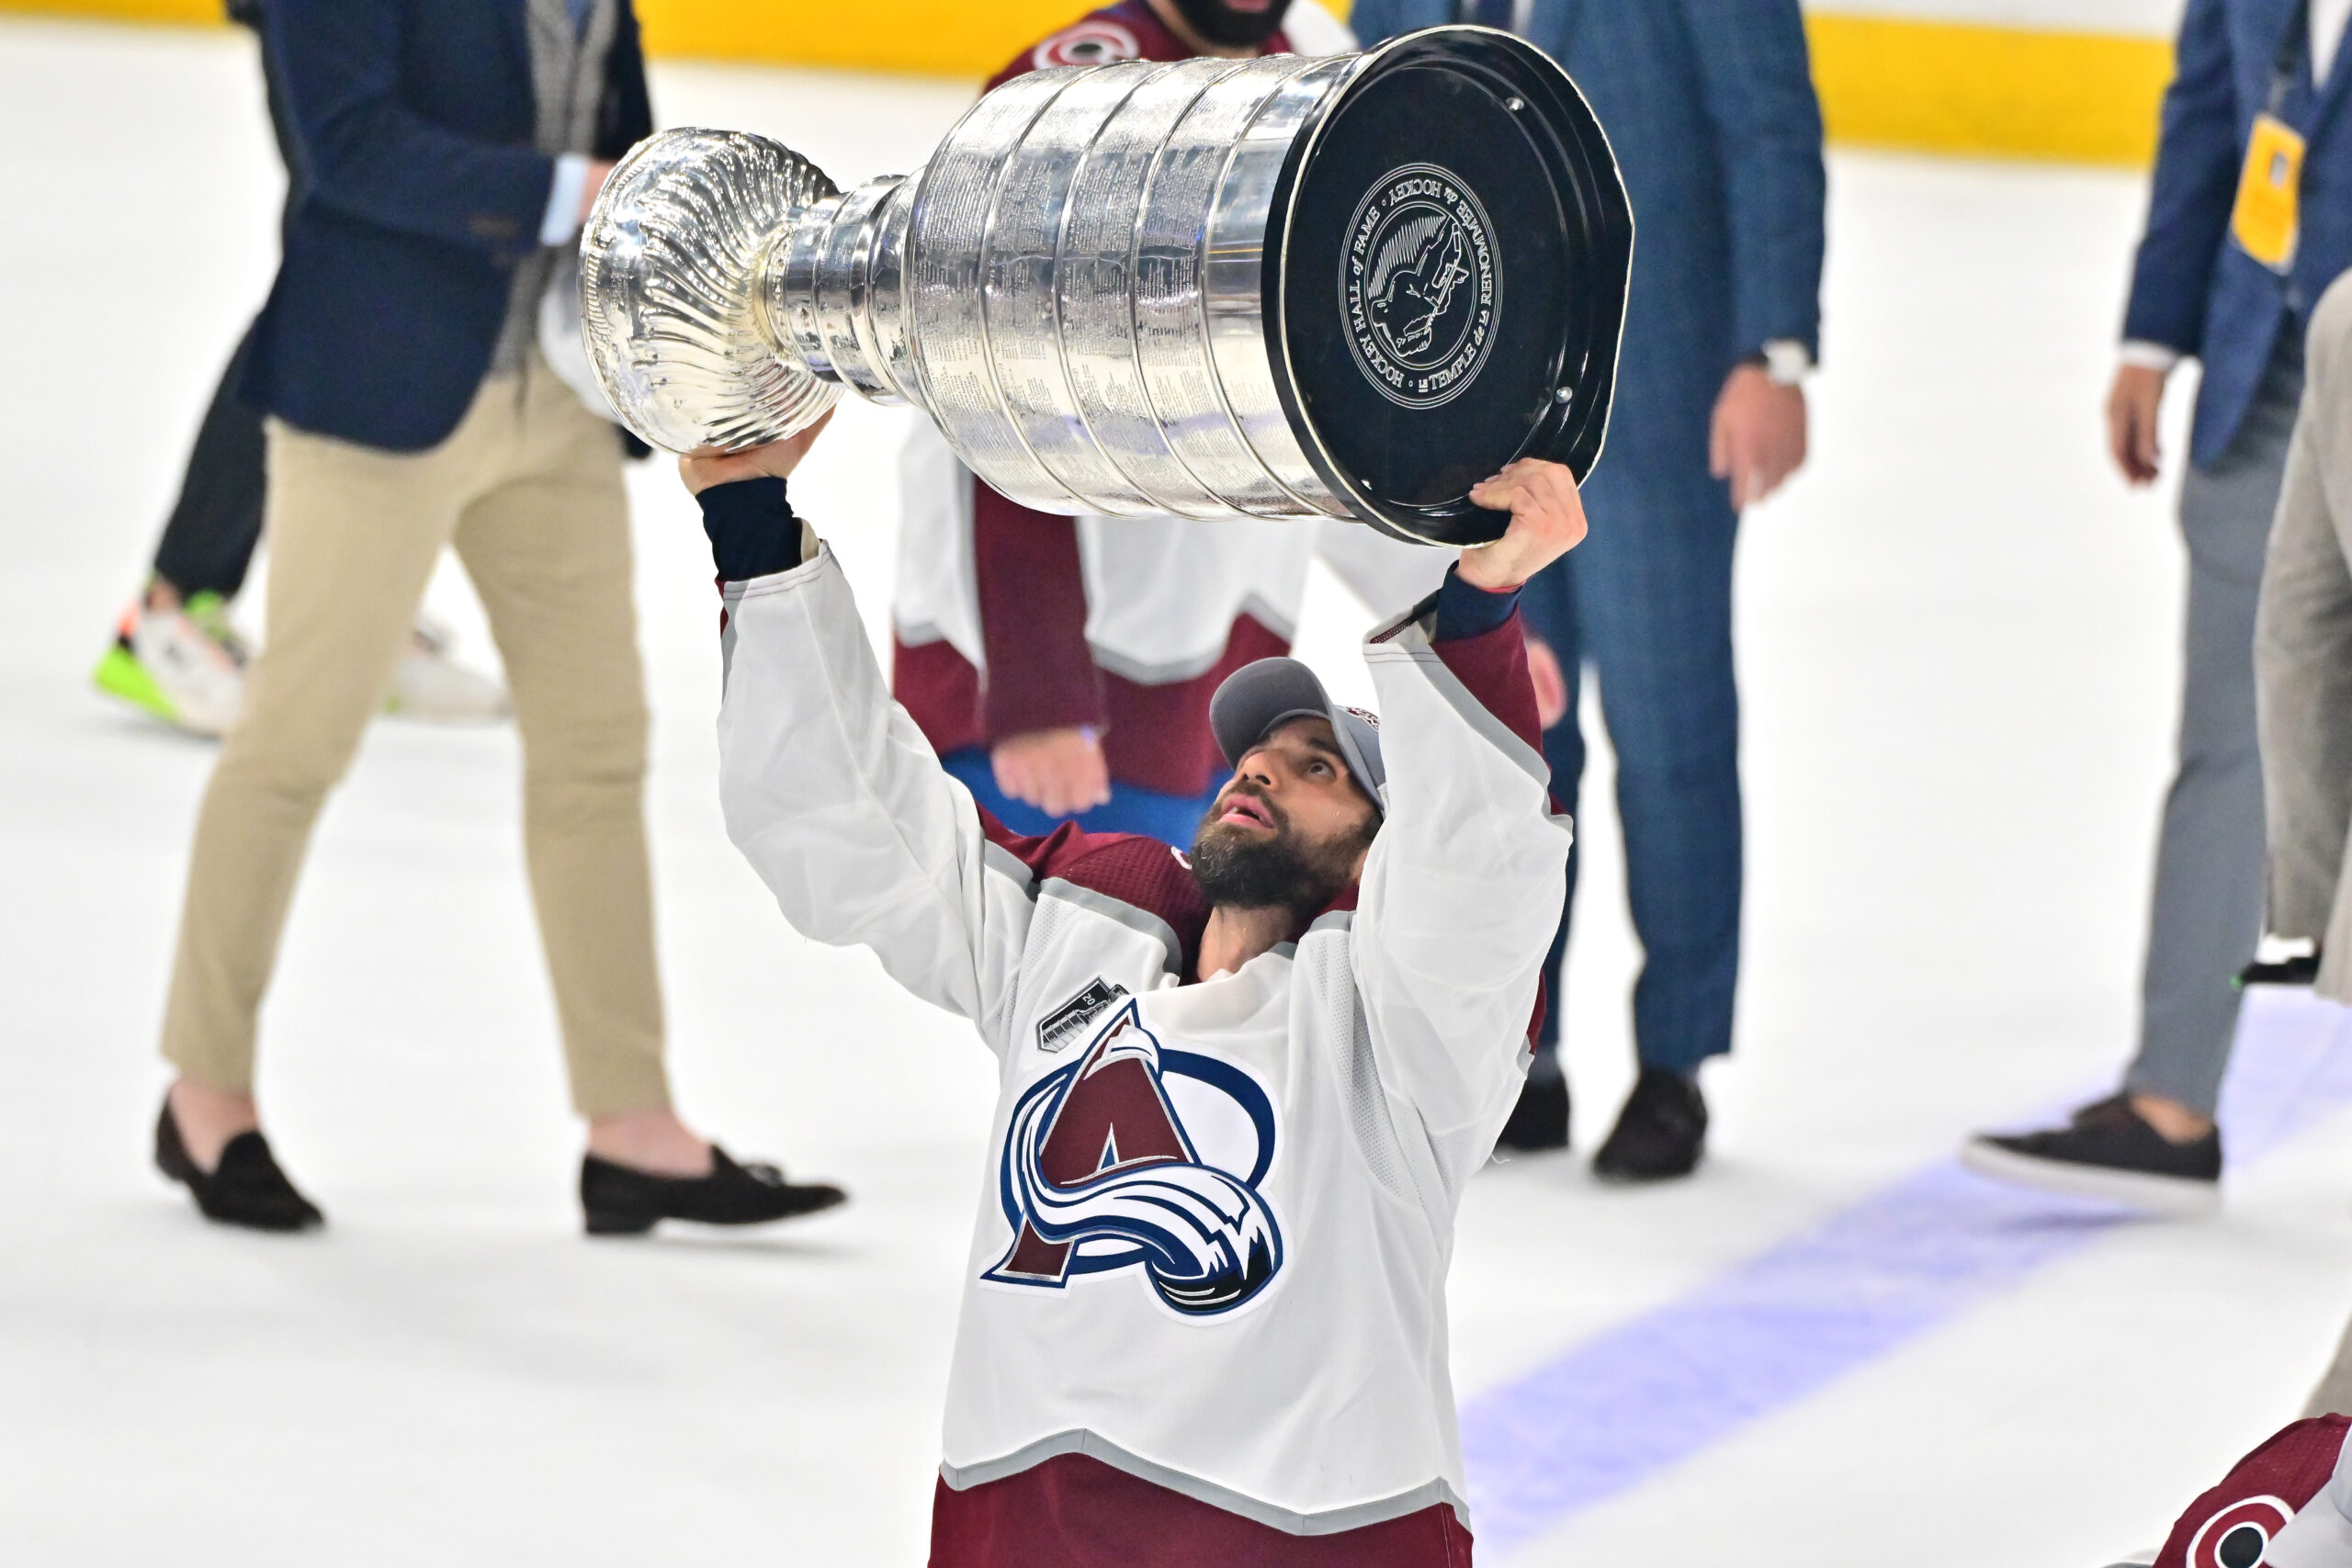 Avalanche damage Stanley Cup moments after winning it